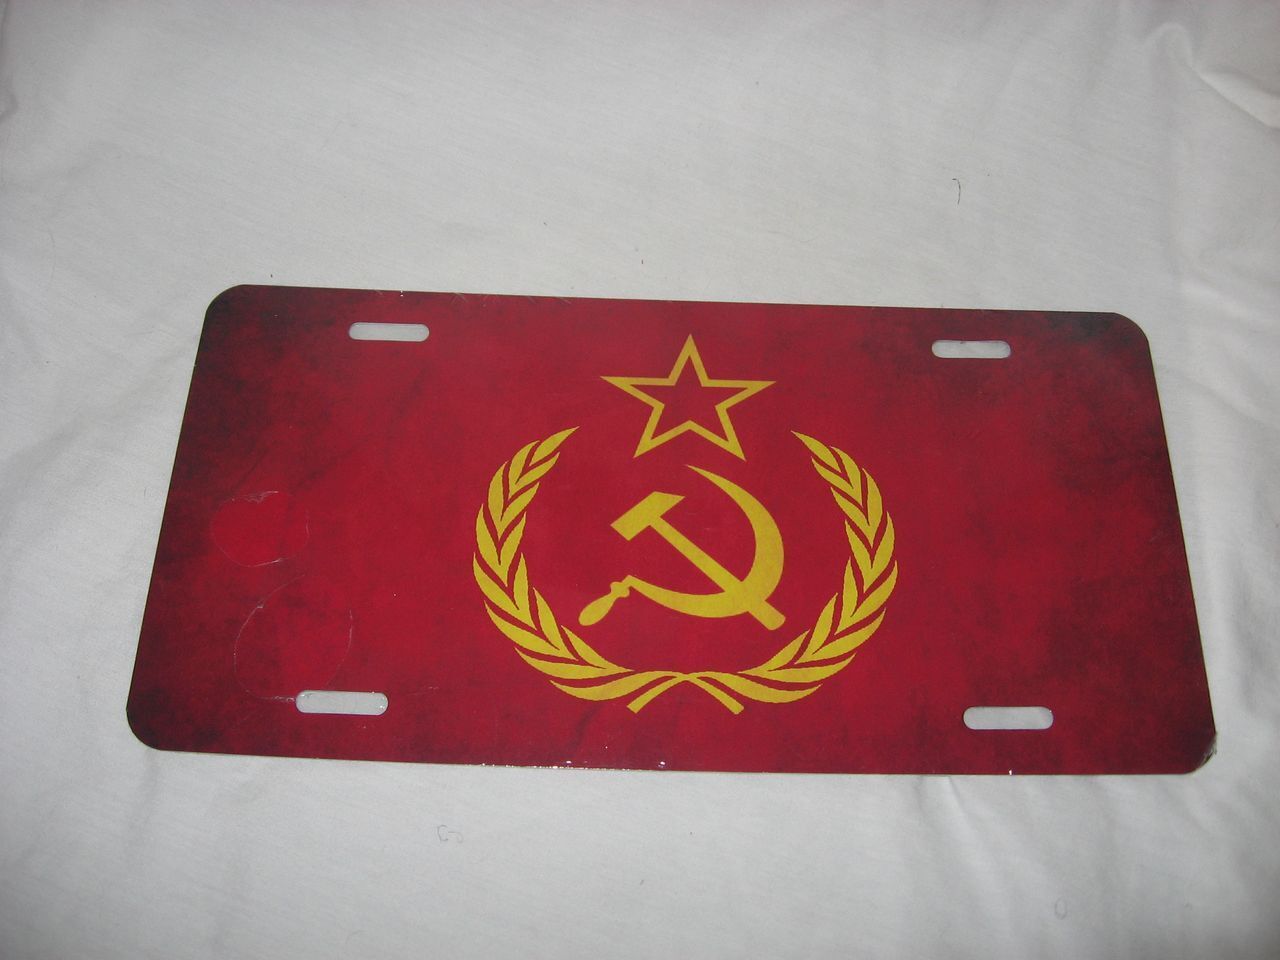 Old Soviet Union U.S.S.R. USSR License Plate 6 X 12 Inches Aluminum New